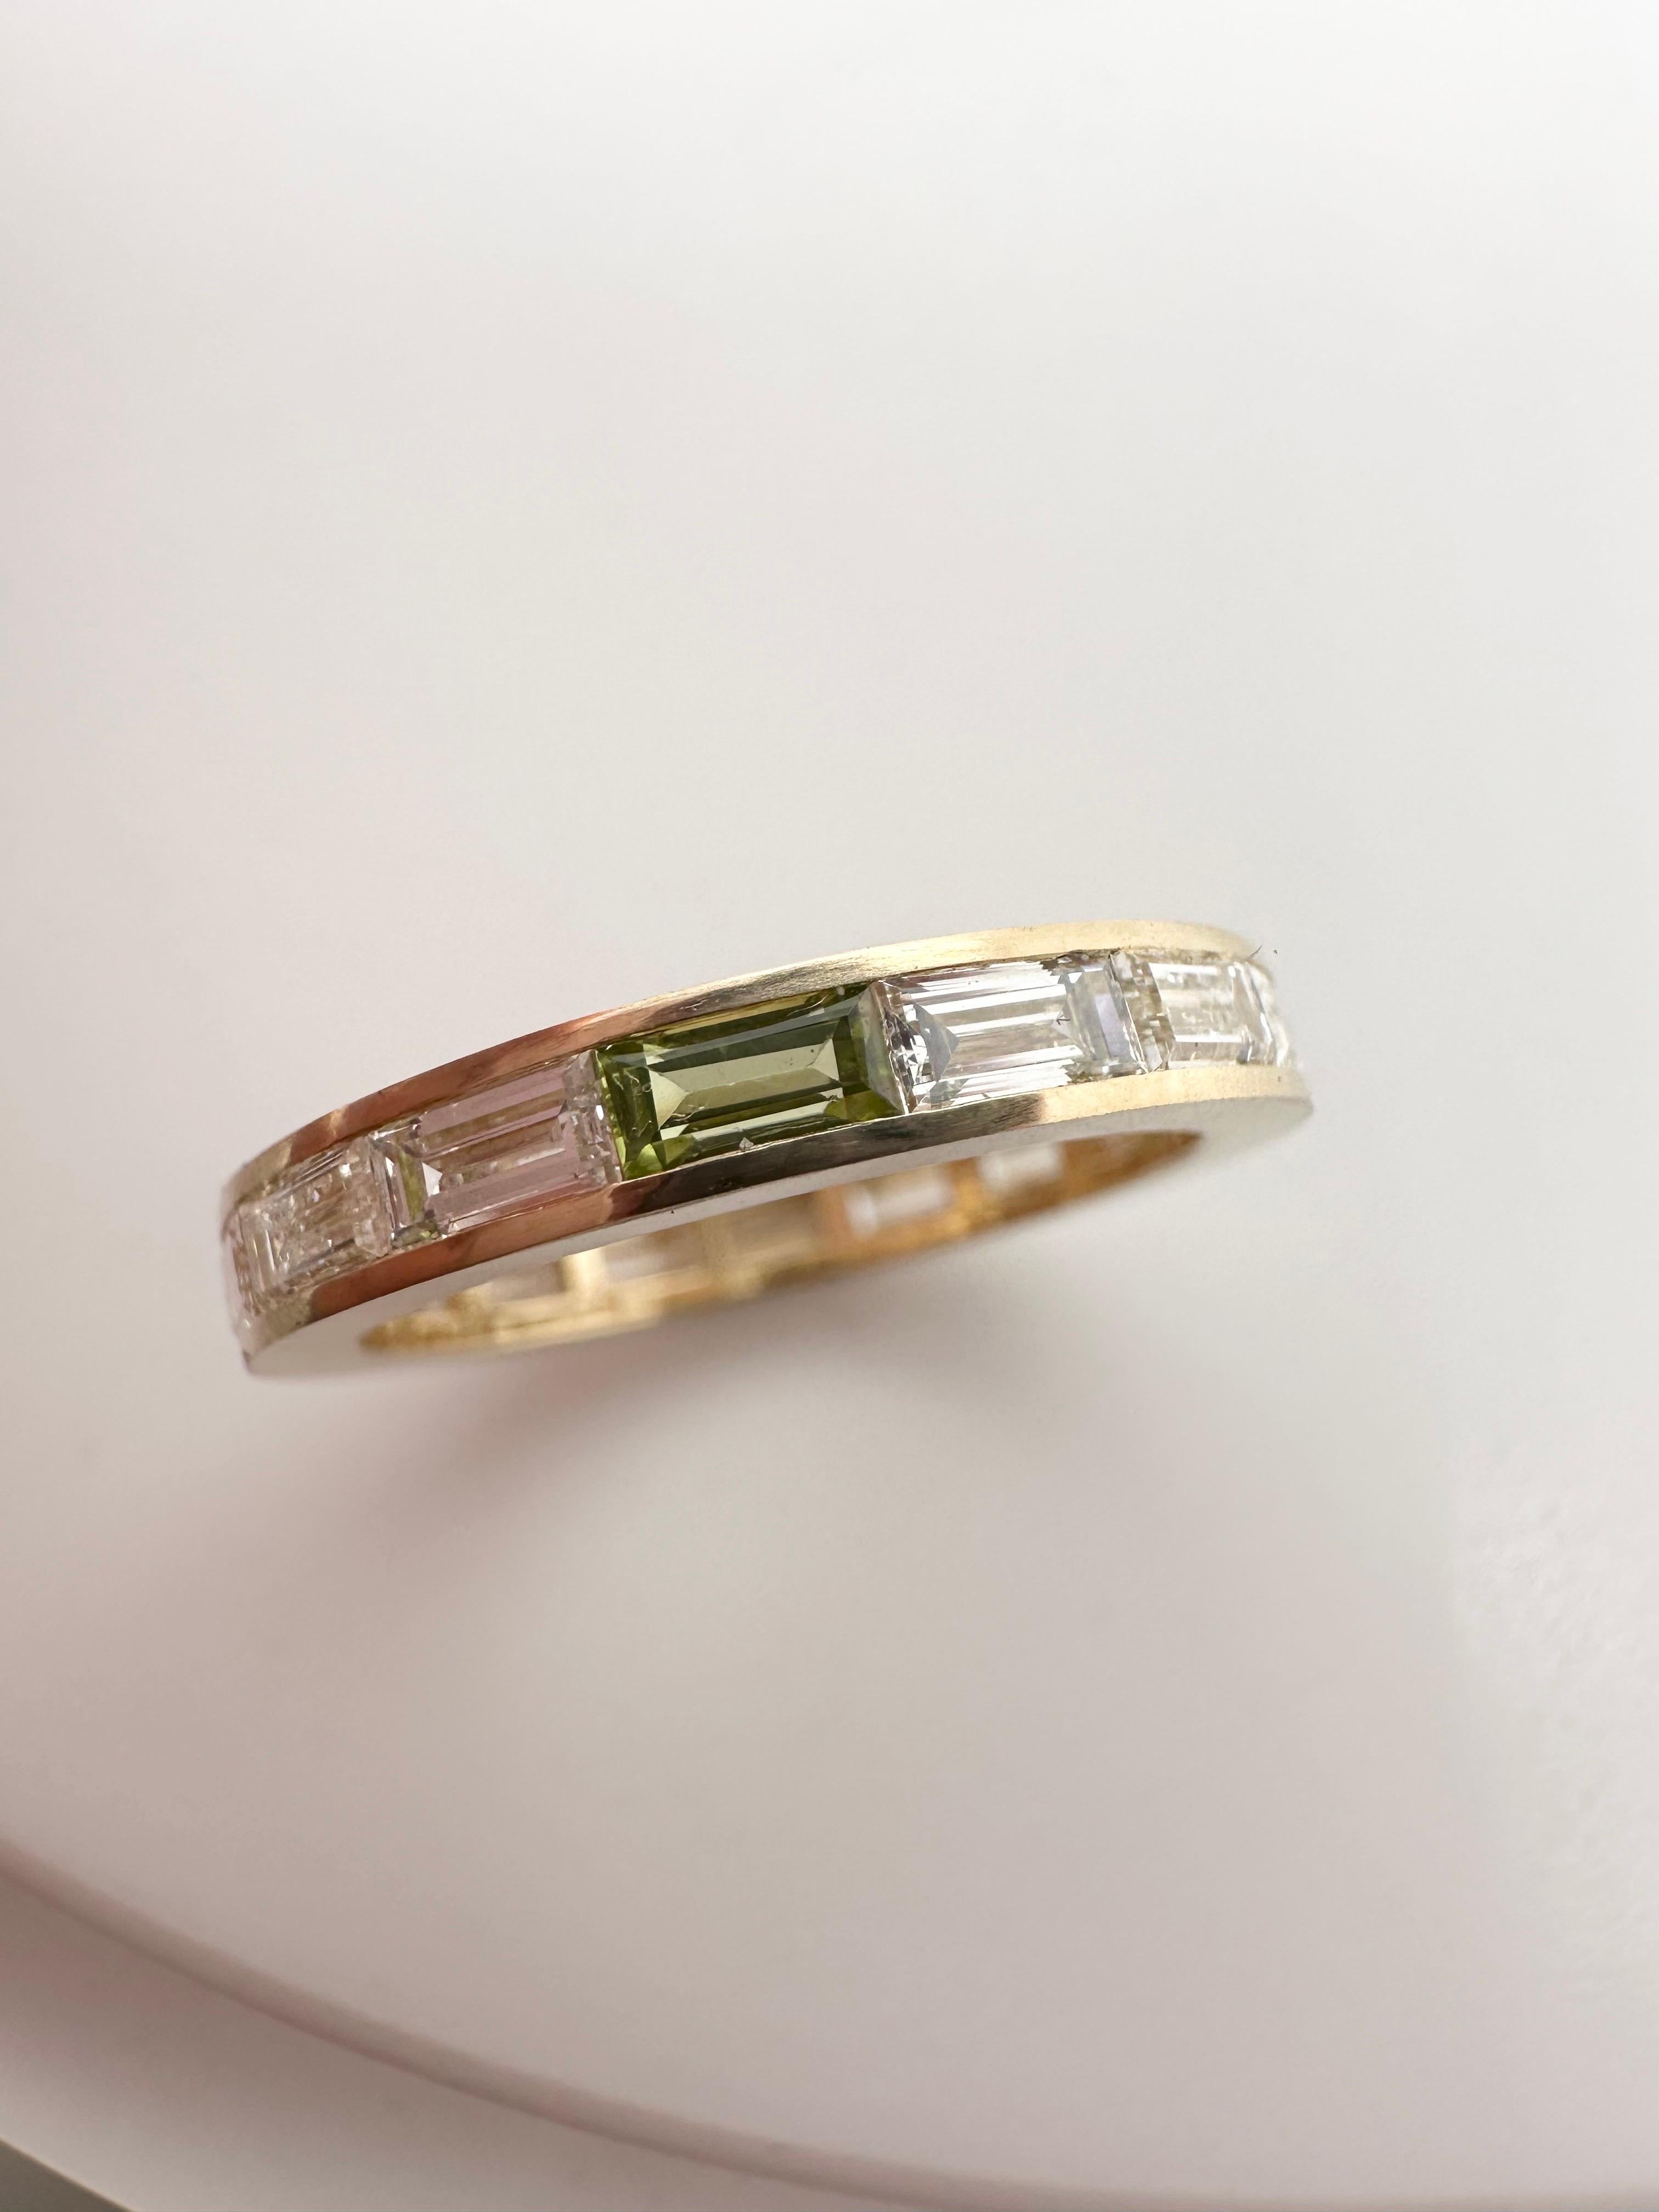 In style now, we see these rings everywhere! 
Wowser! Set all around with diamond baguettes except for one stone being a green peridot, this makes a difference and sets such a playful tone to the ring, made in 18KT yellow gold! In fashion now and